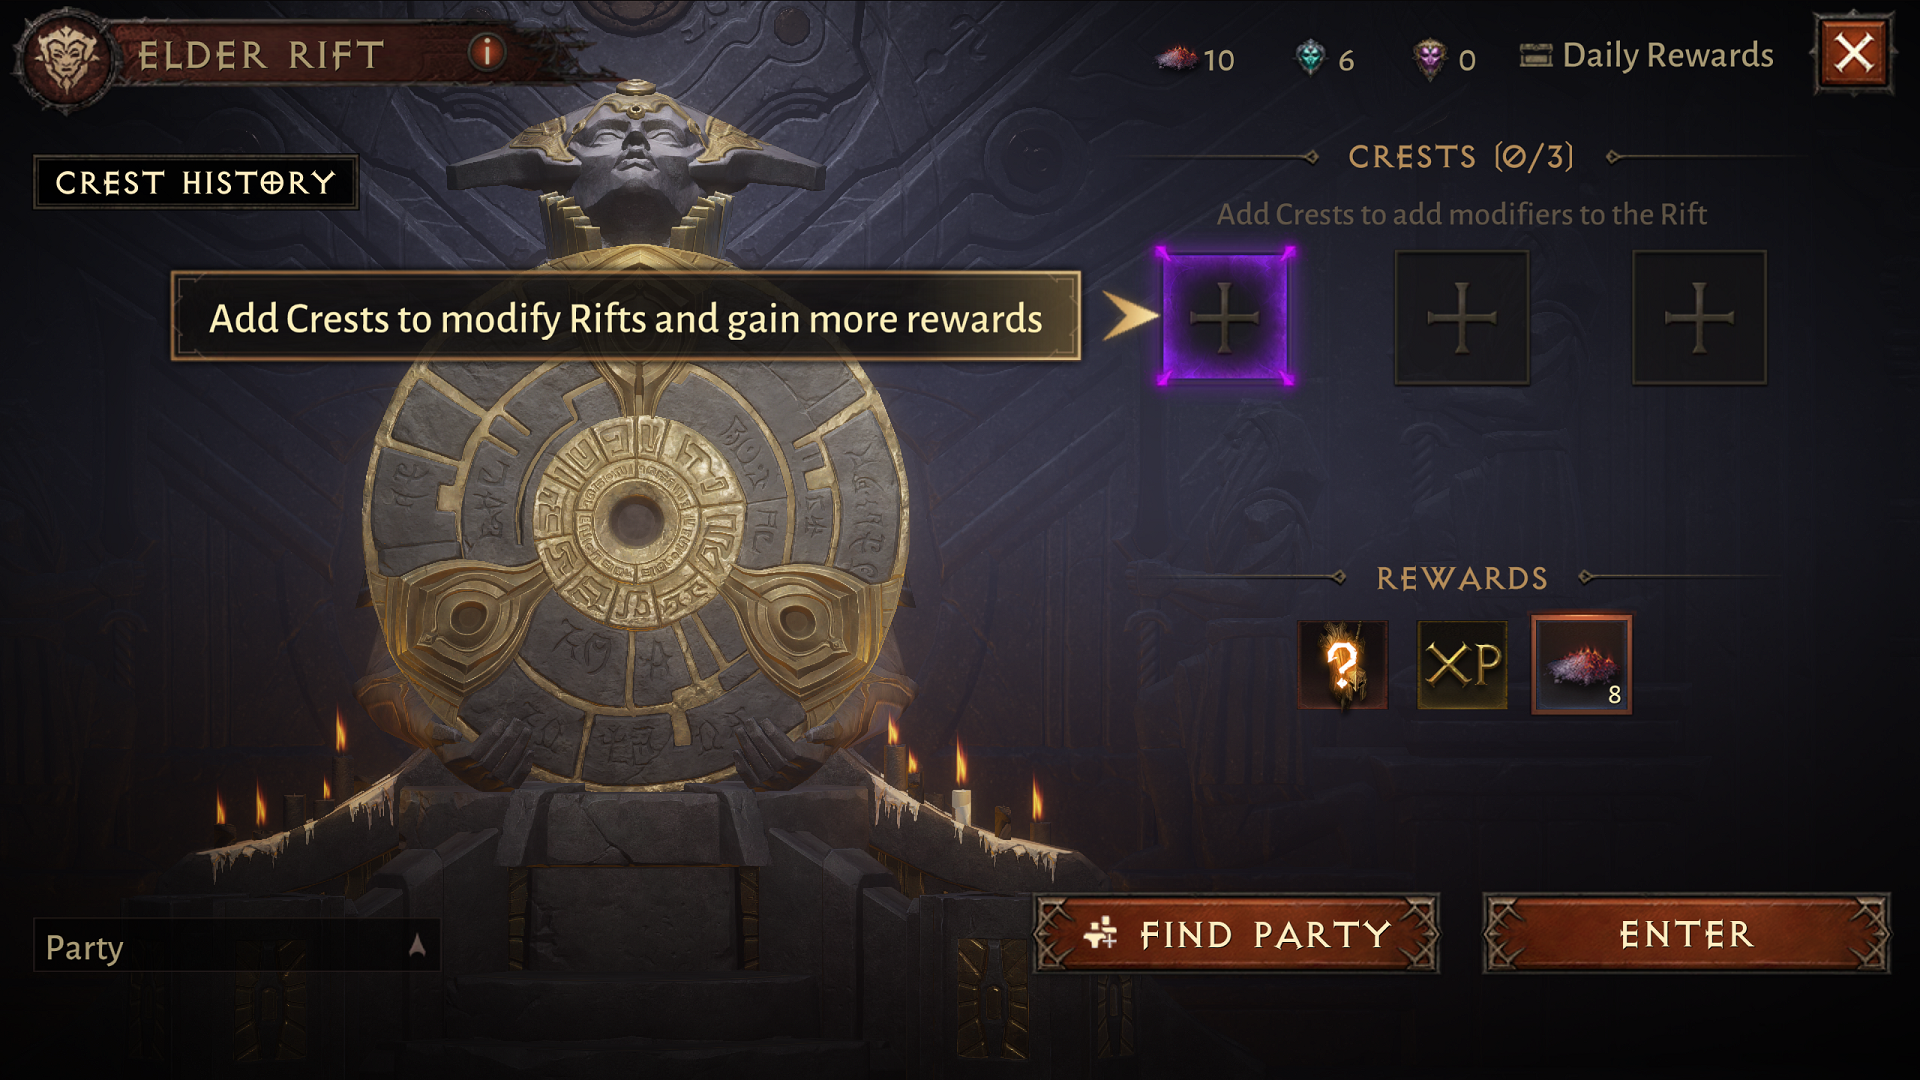 The UI for applying Crests and opening an Elder Rift in Diablo Immortal